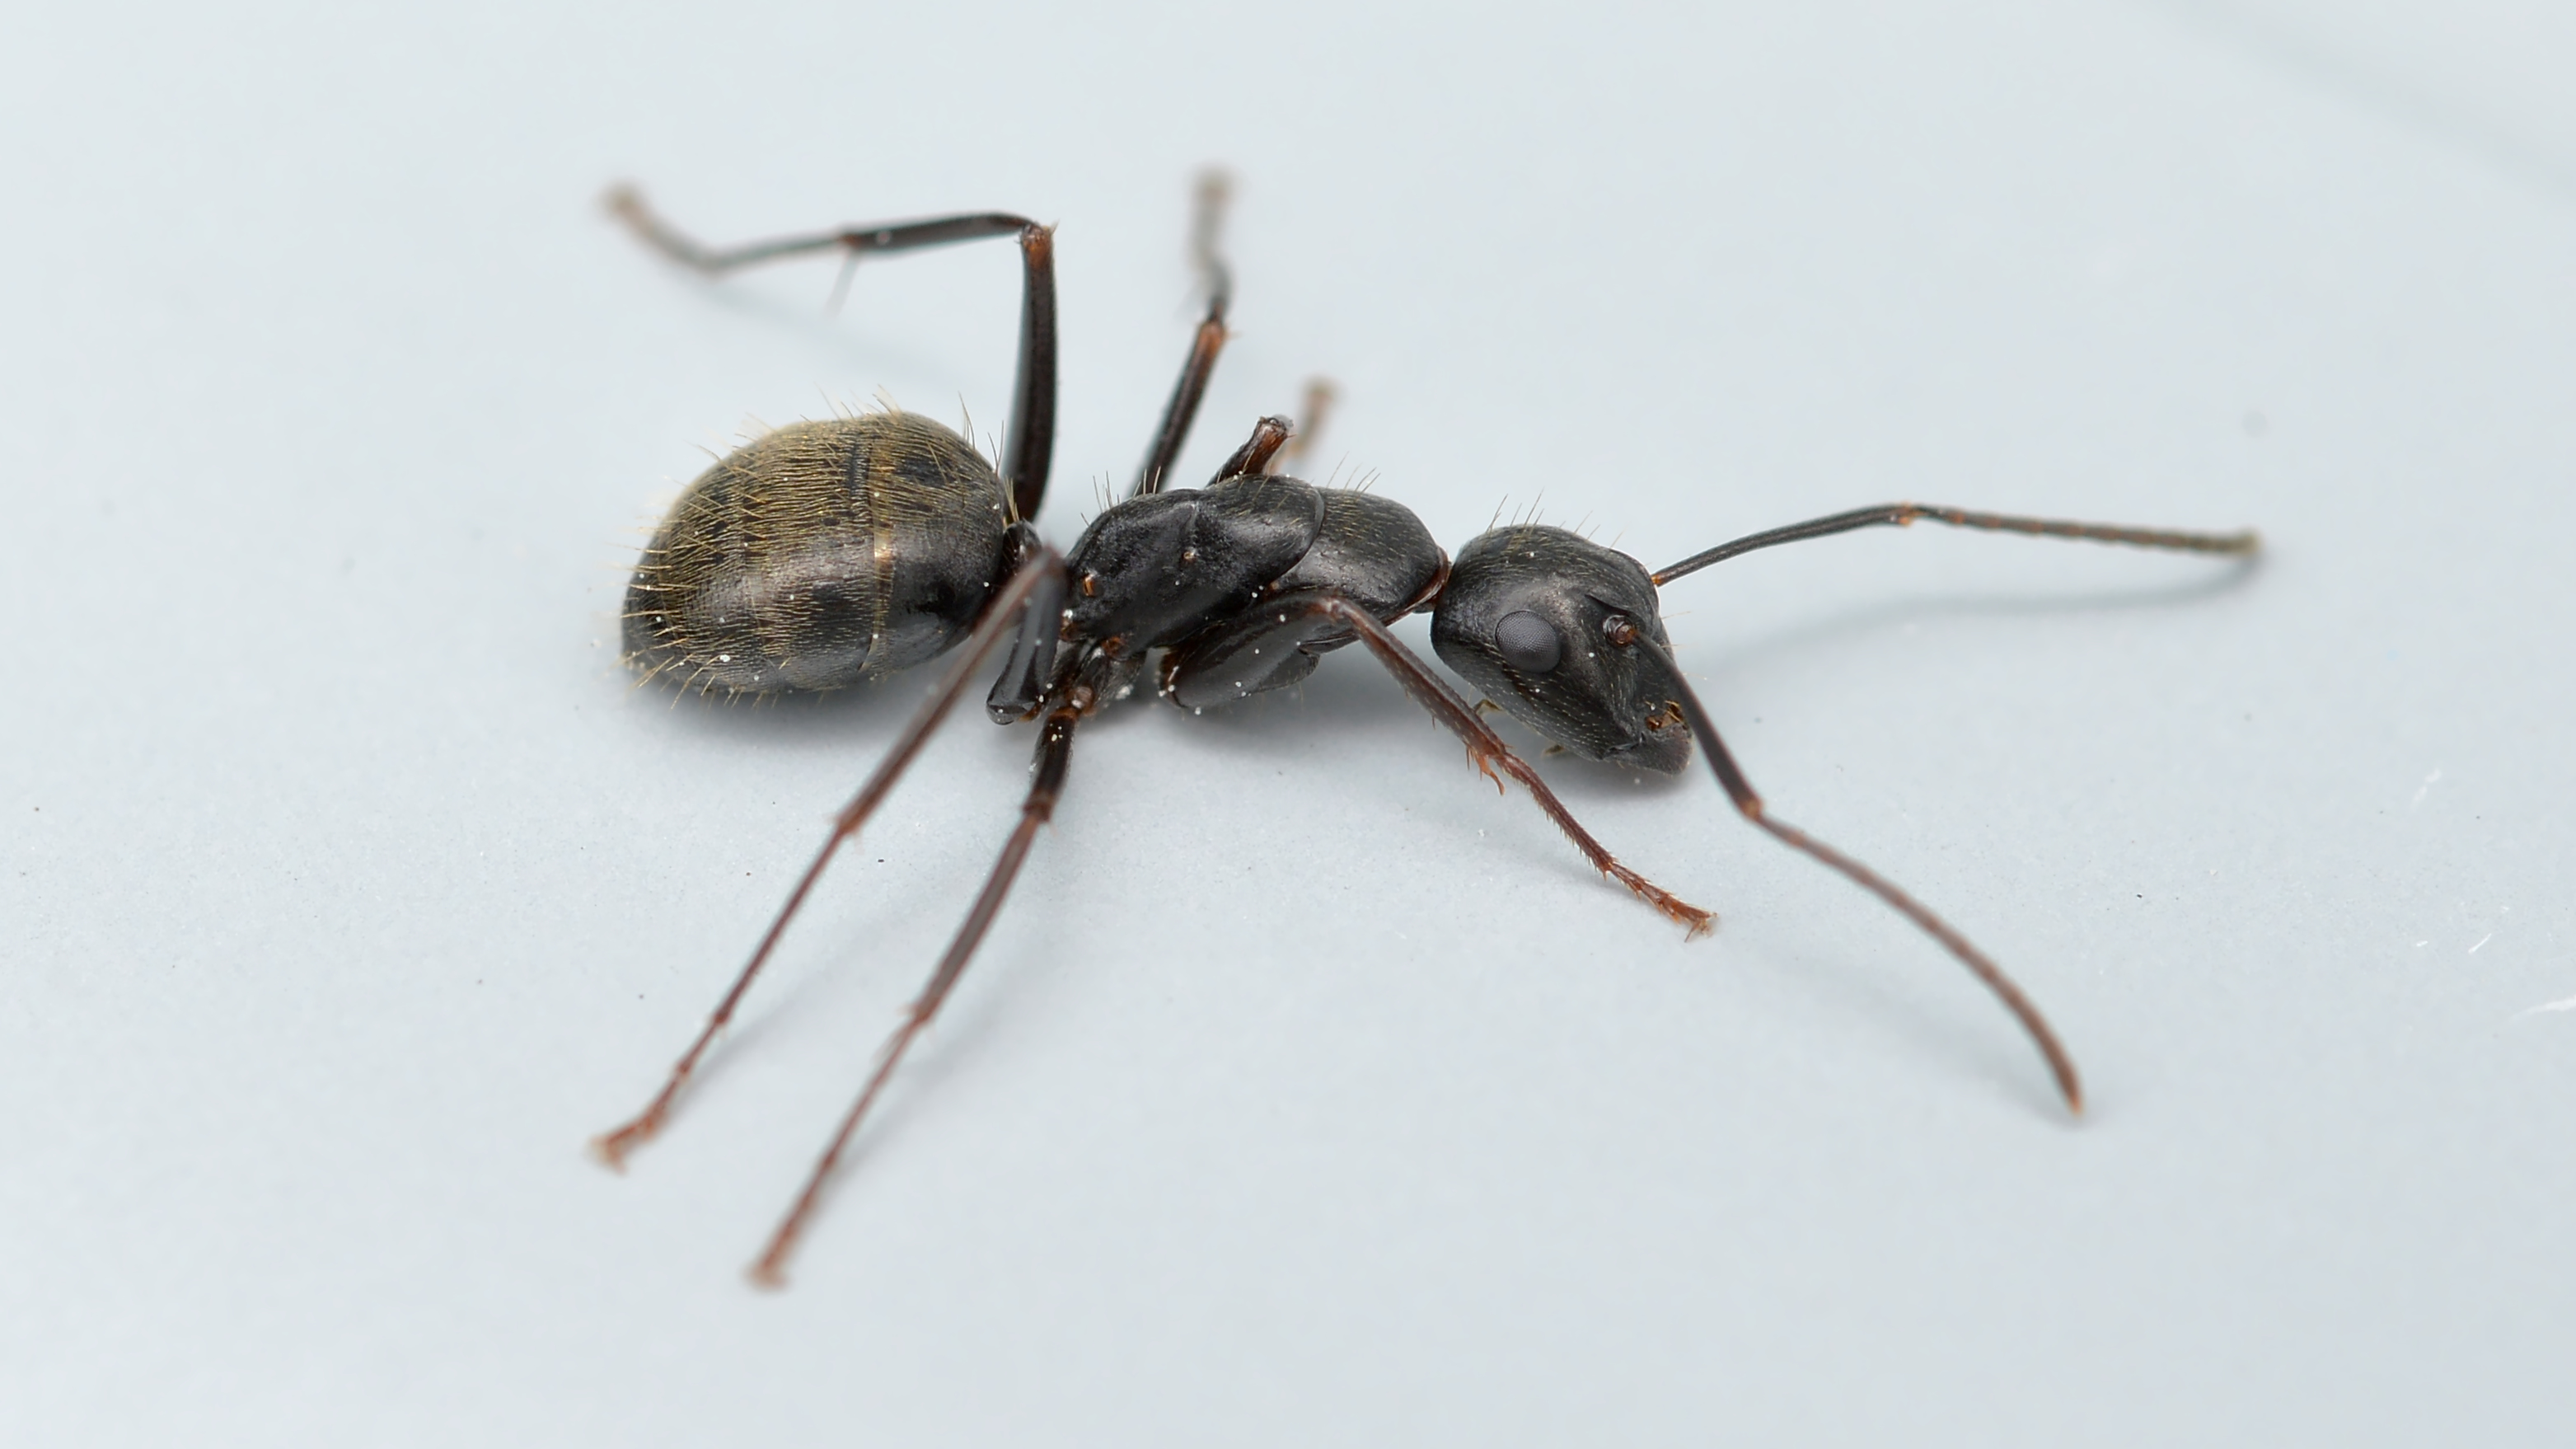 Large black ant stands on a white surface